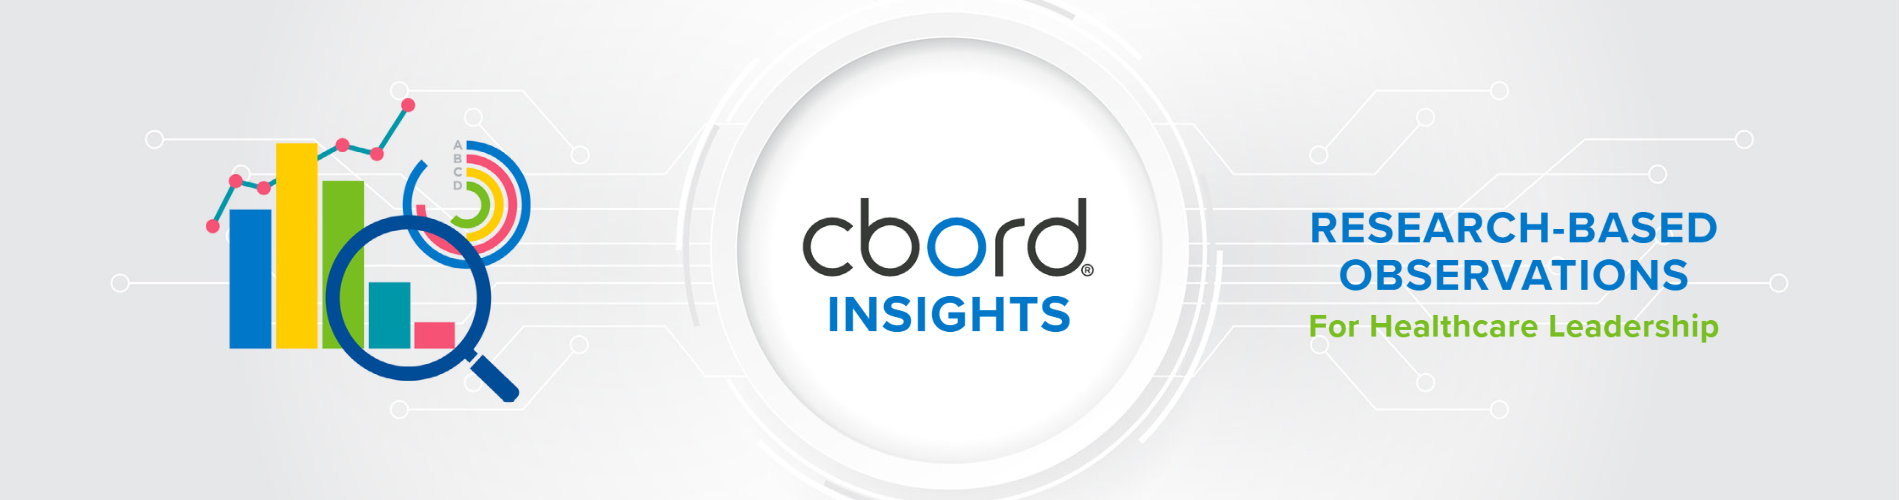 CBORD Insights research-based observations for healthcare leadership